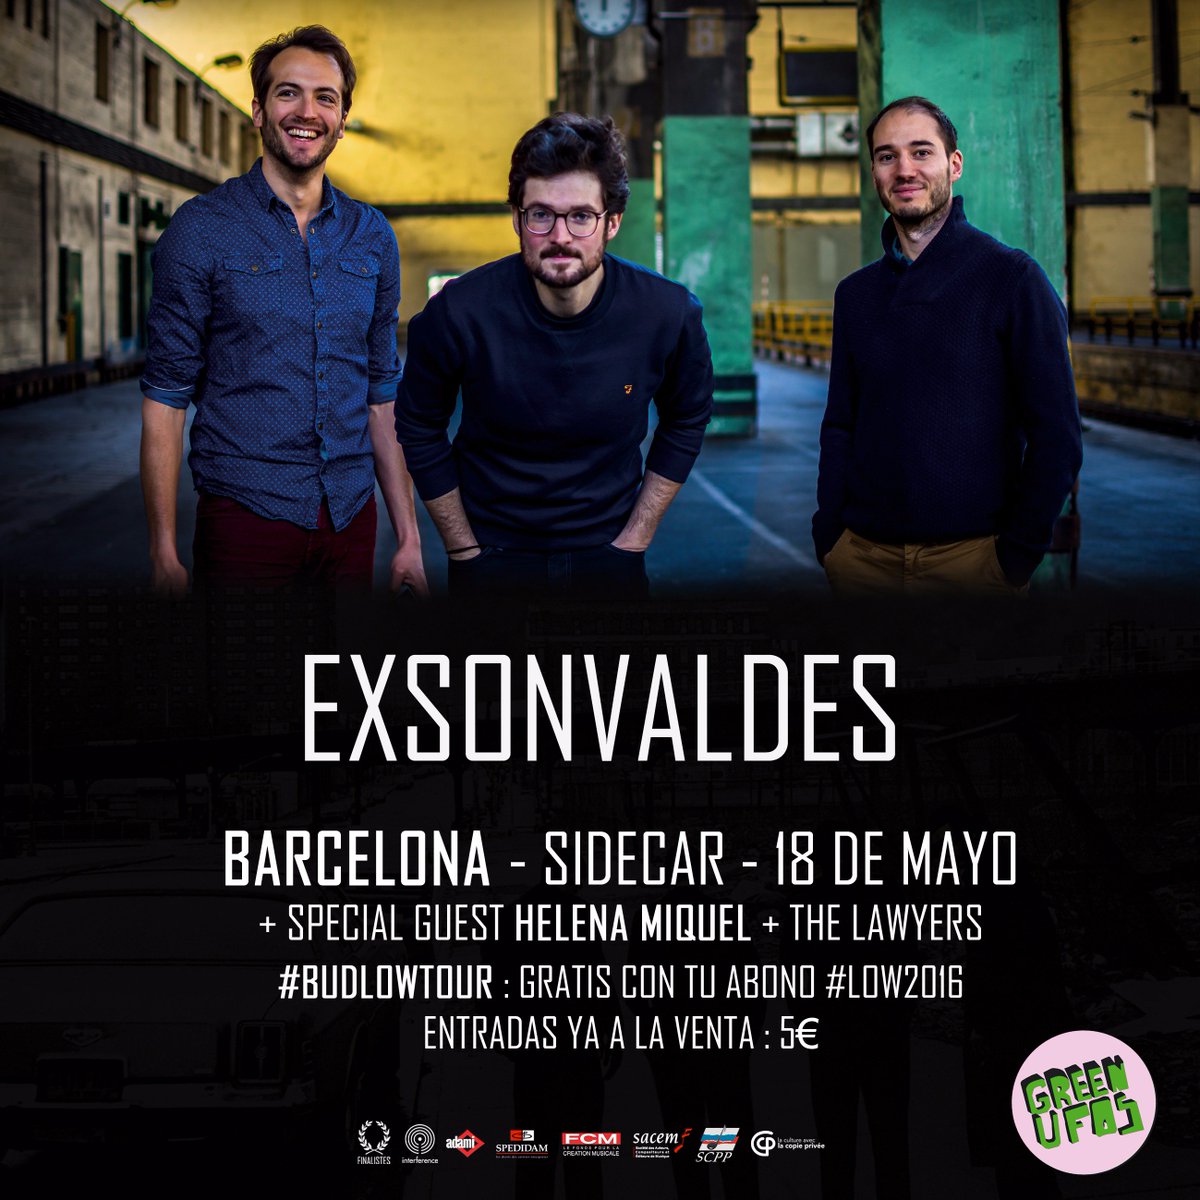 Barcelona! 2 weeks left before our show at @SIDECARbcn + special guest #HelenaMiquel + @LawyersBand 
Who's coming?